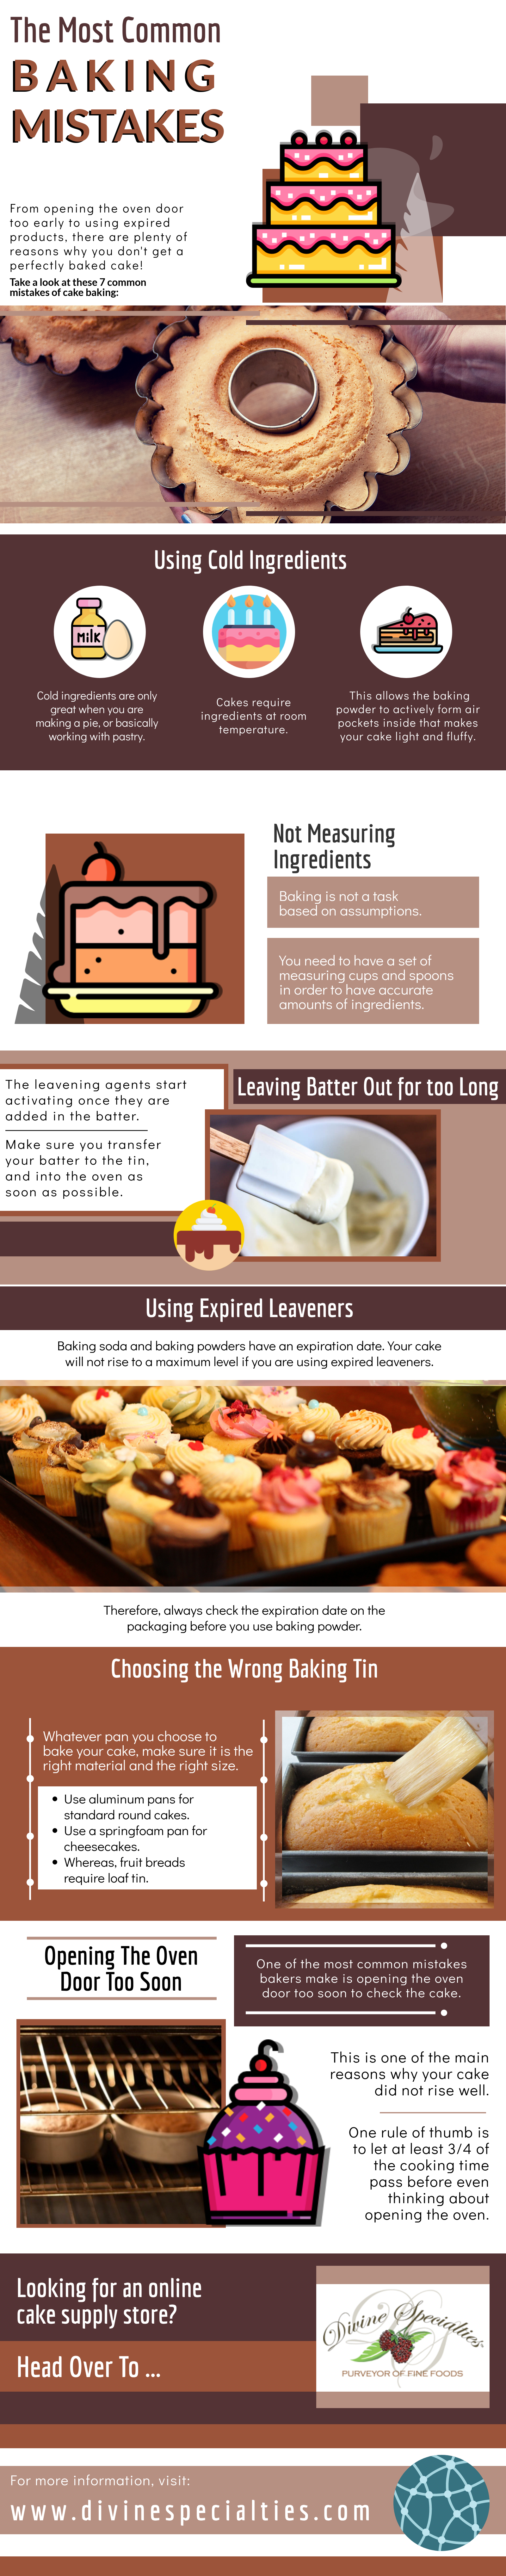 The Most Common Baking Mistakes